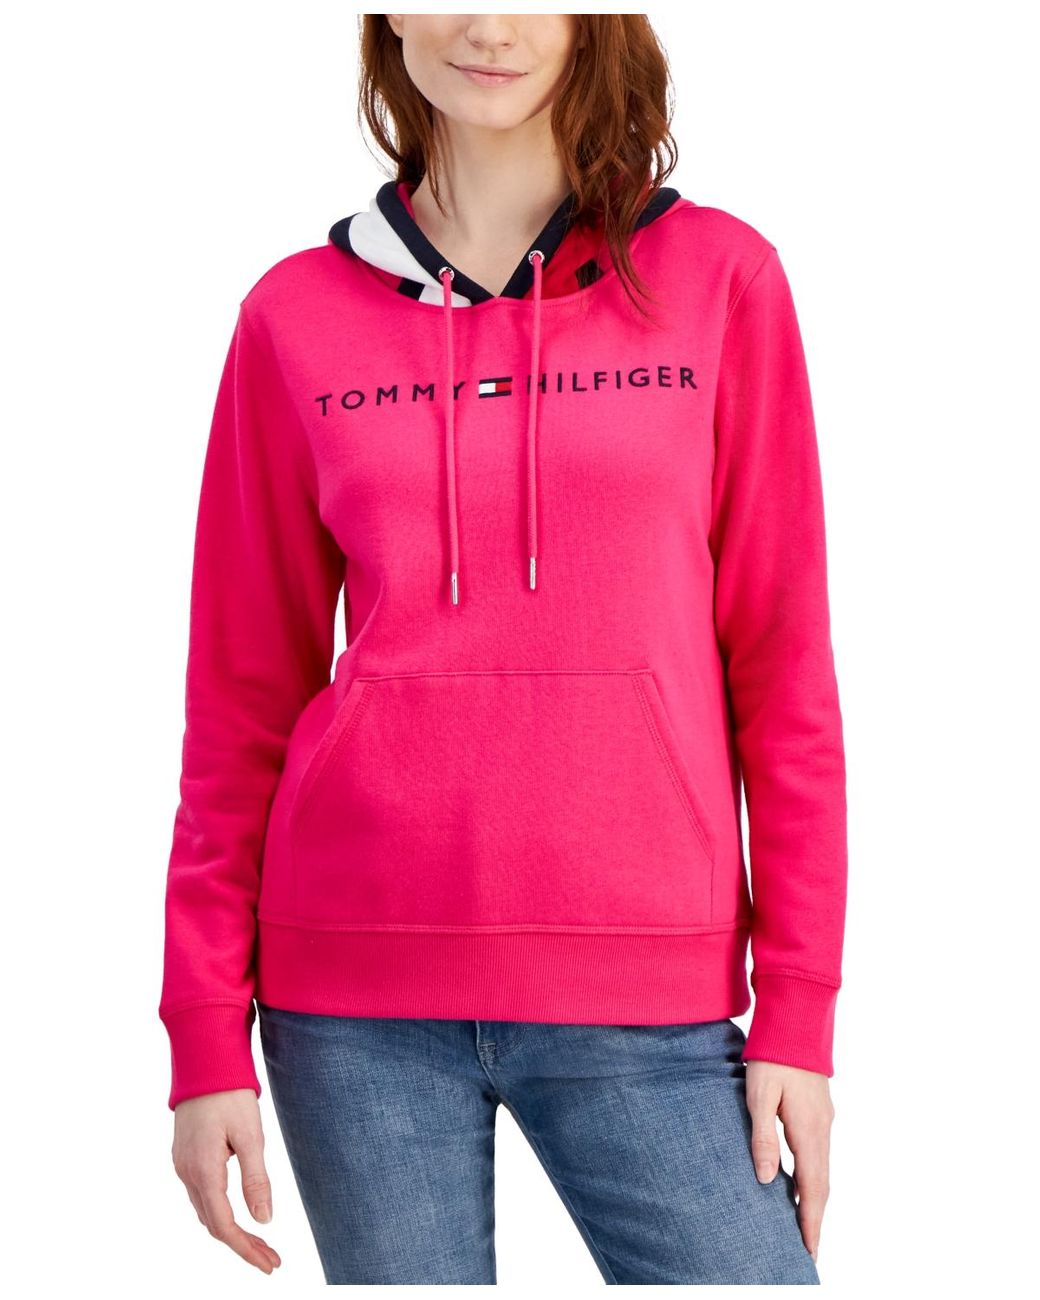 Tommy Hilfiger Logo Colorblocked Pullover Hoodie in Pink | Lyst